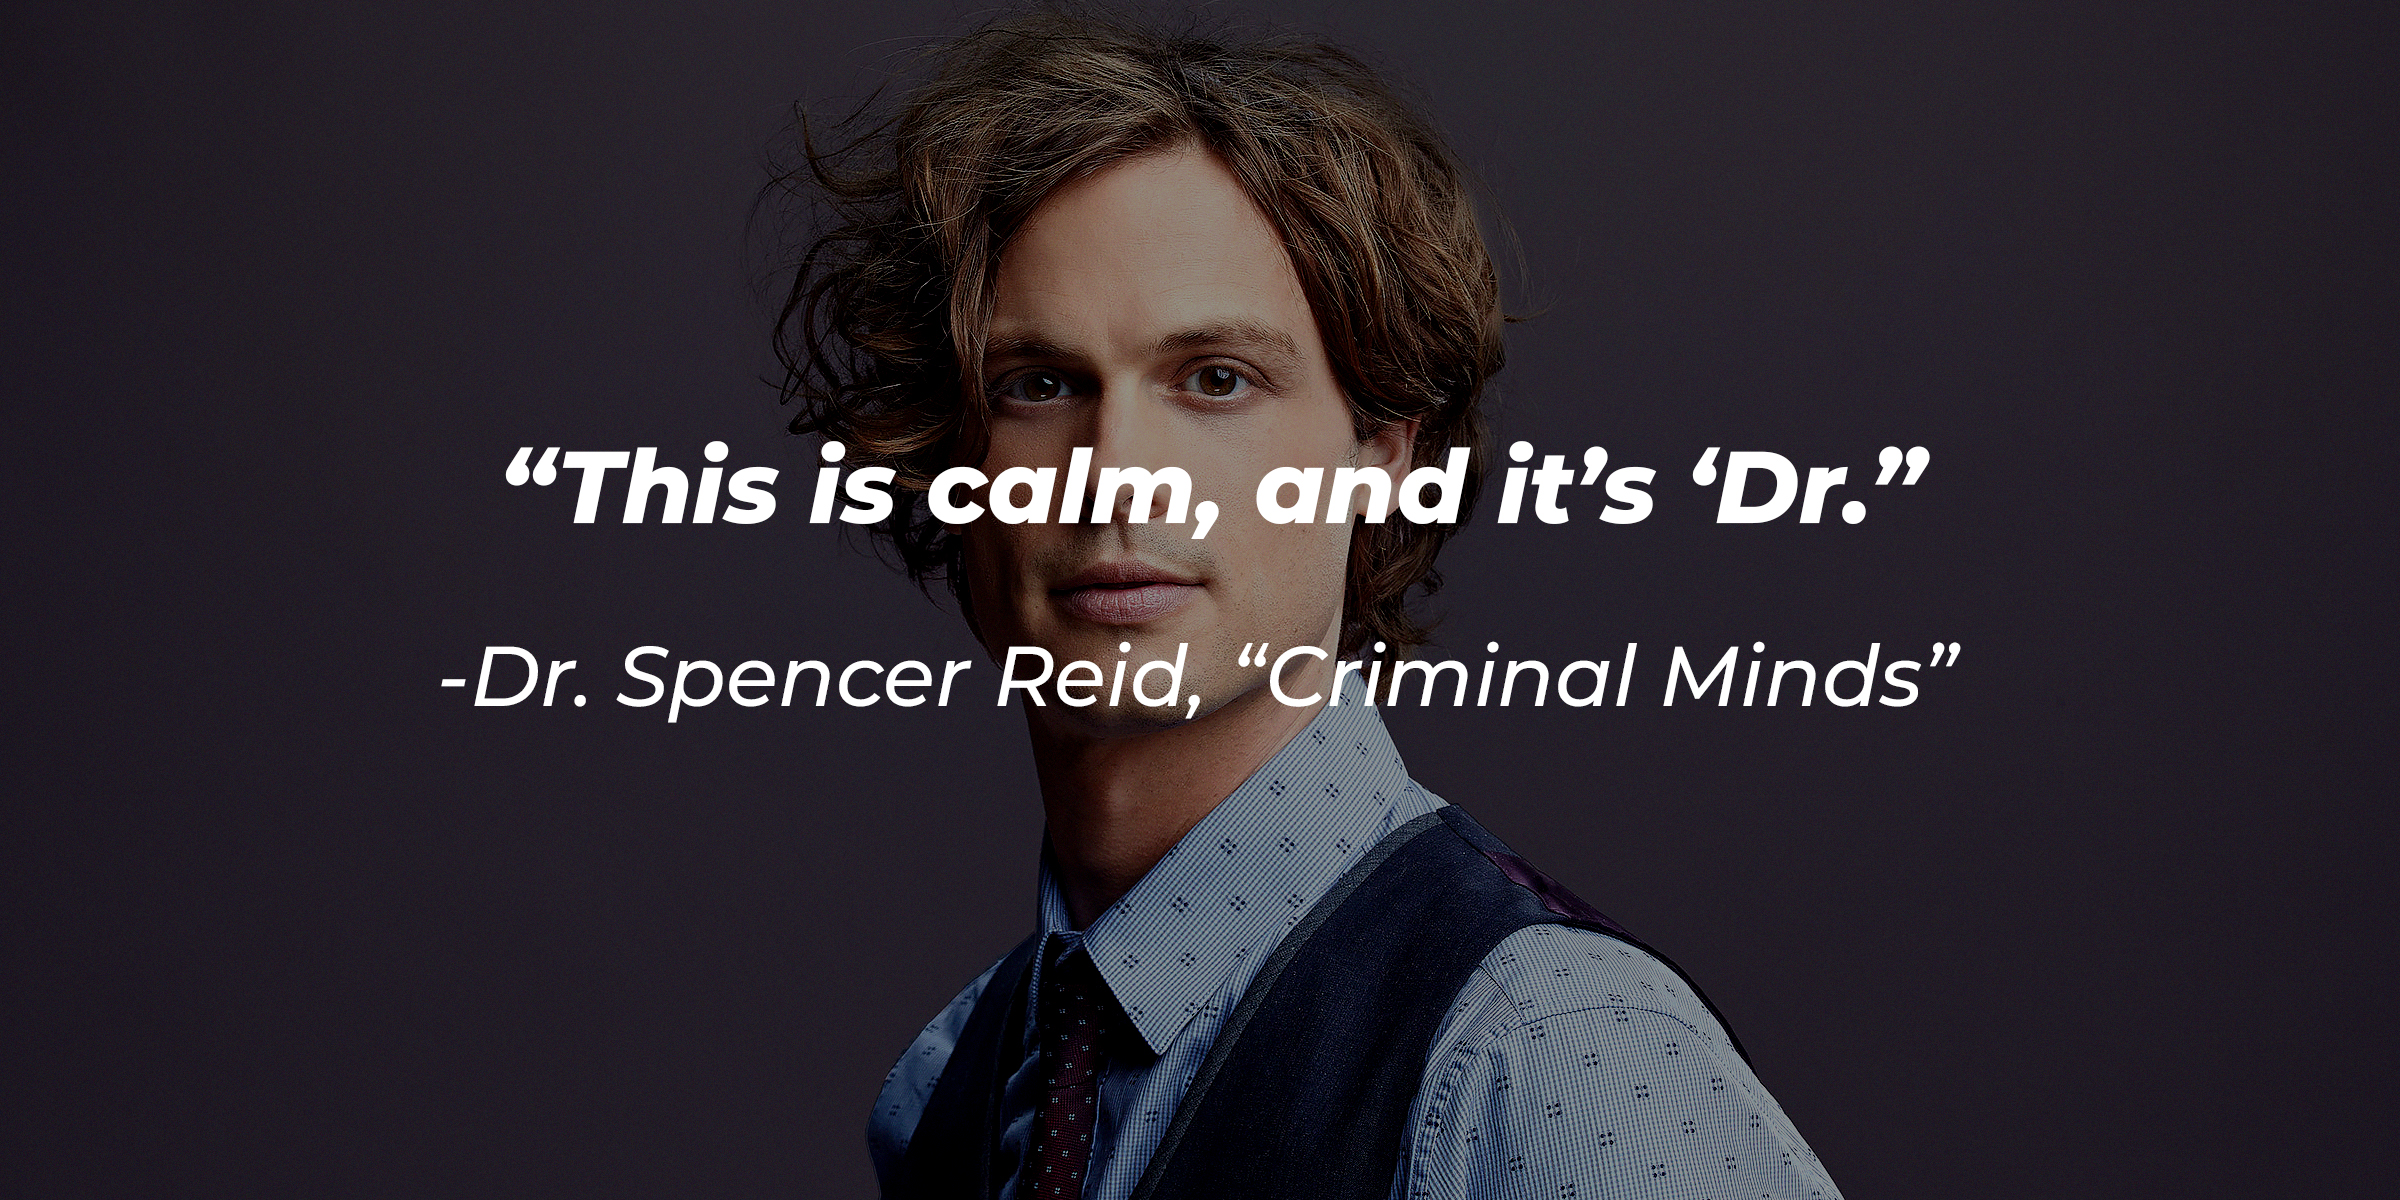 A photo of Dr. Spencer Reid with Dr. Spencer Reid's quote: “This is calm, and it’s ‘Dr.” | Source: Getty Images